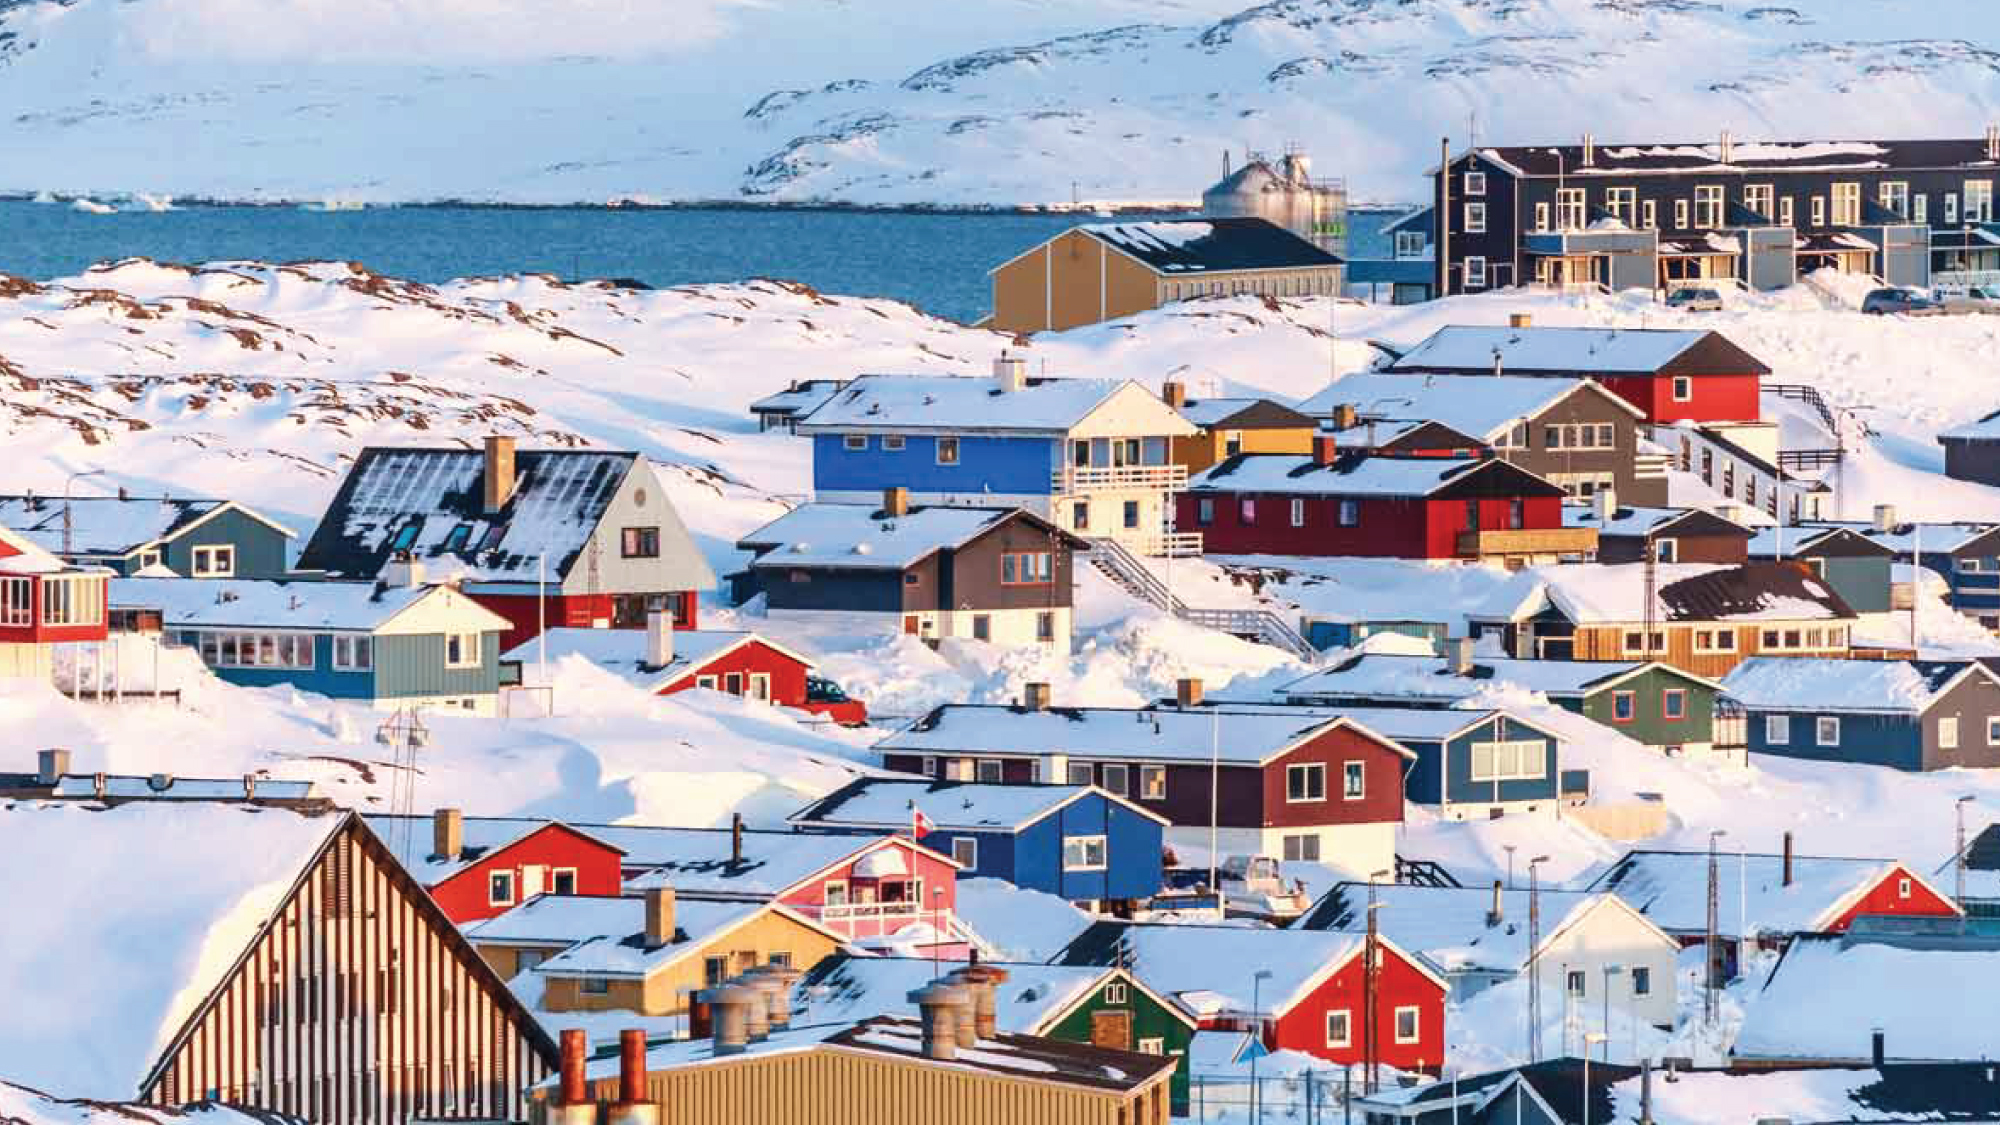 Charming view of Nuuk, Greenland covered in snow.